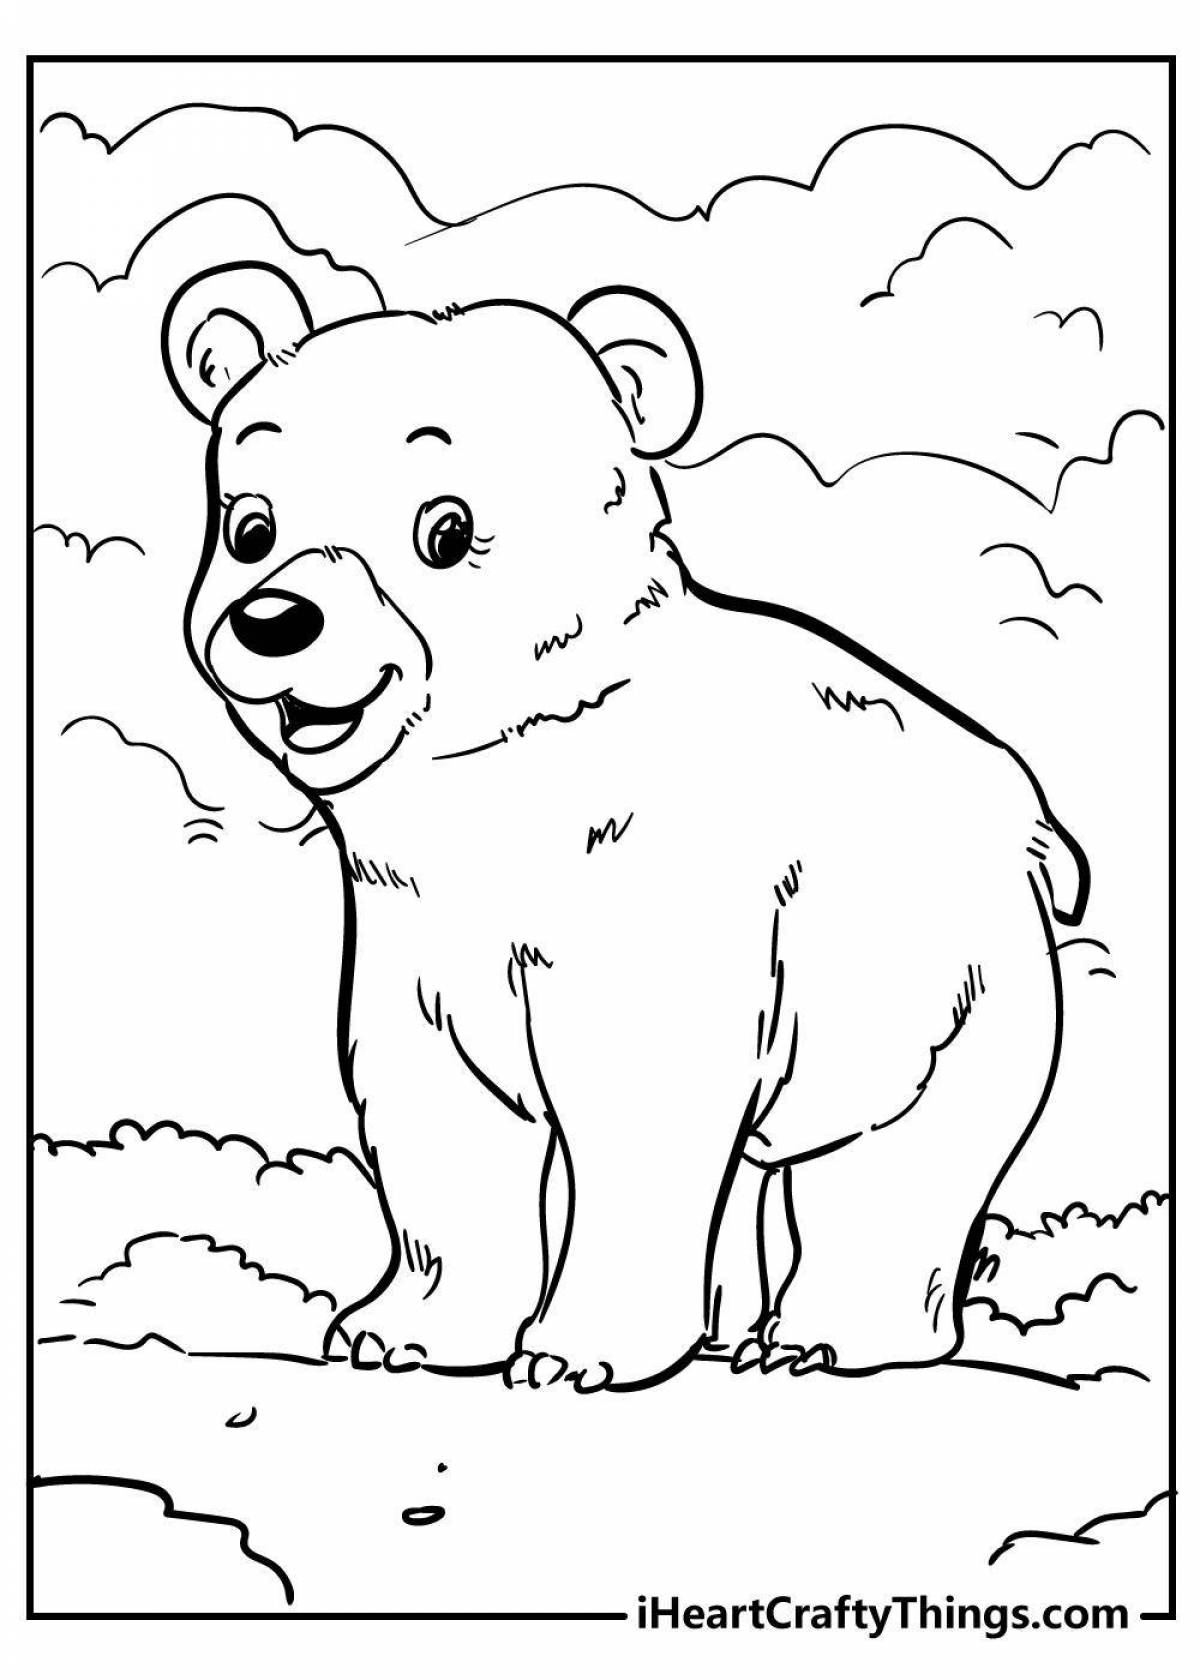 Adorable bear coloring book for children 2-3 years old